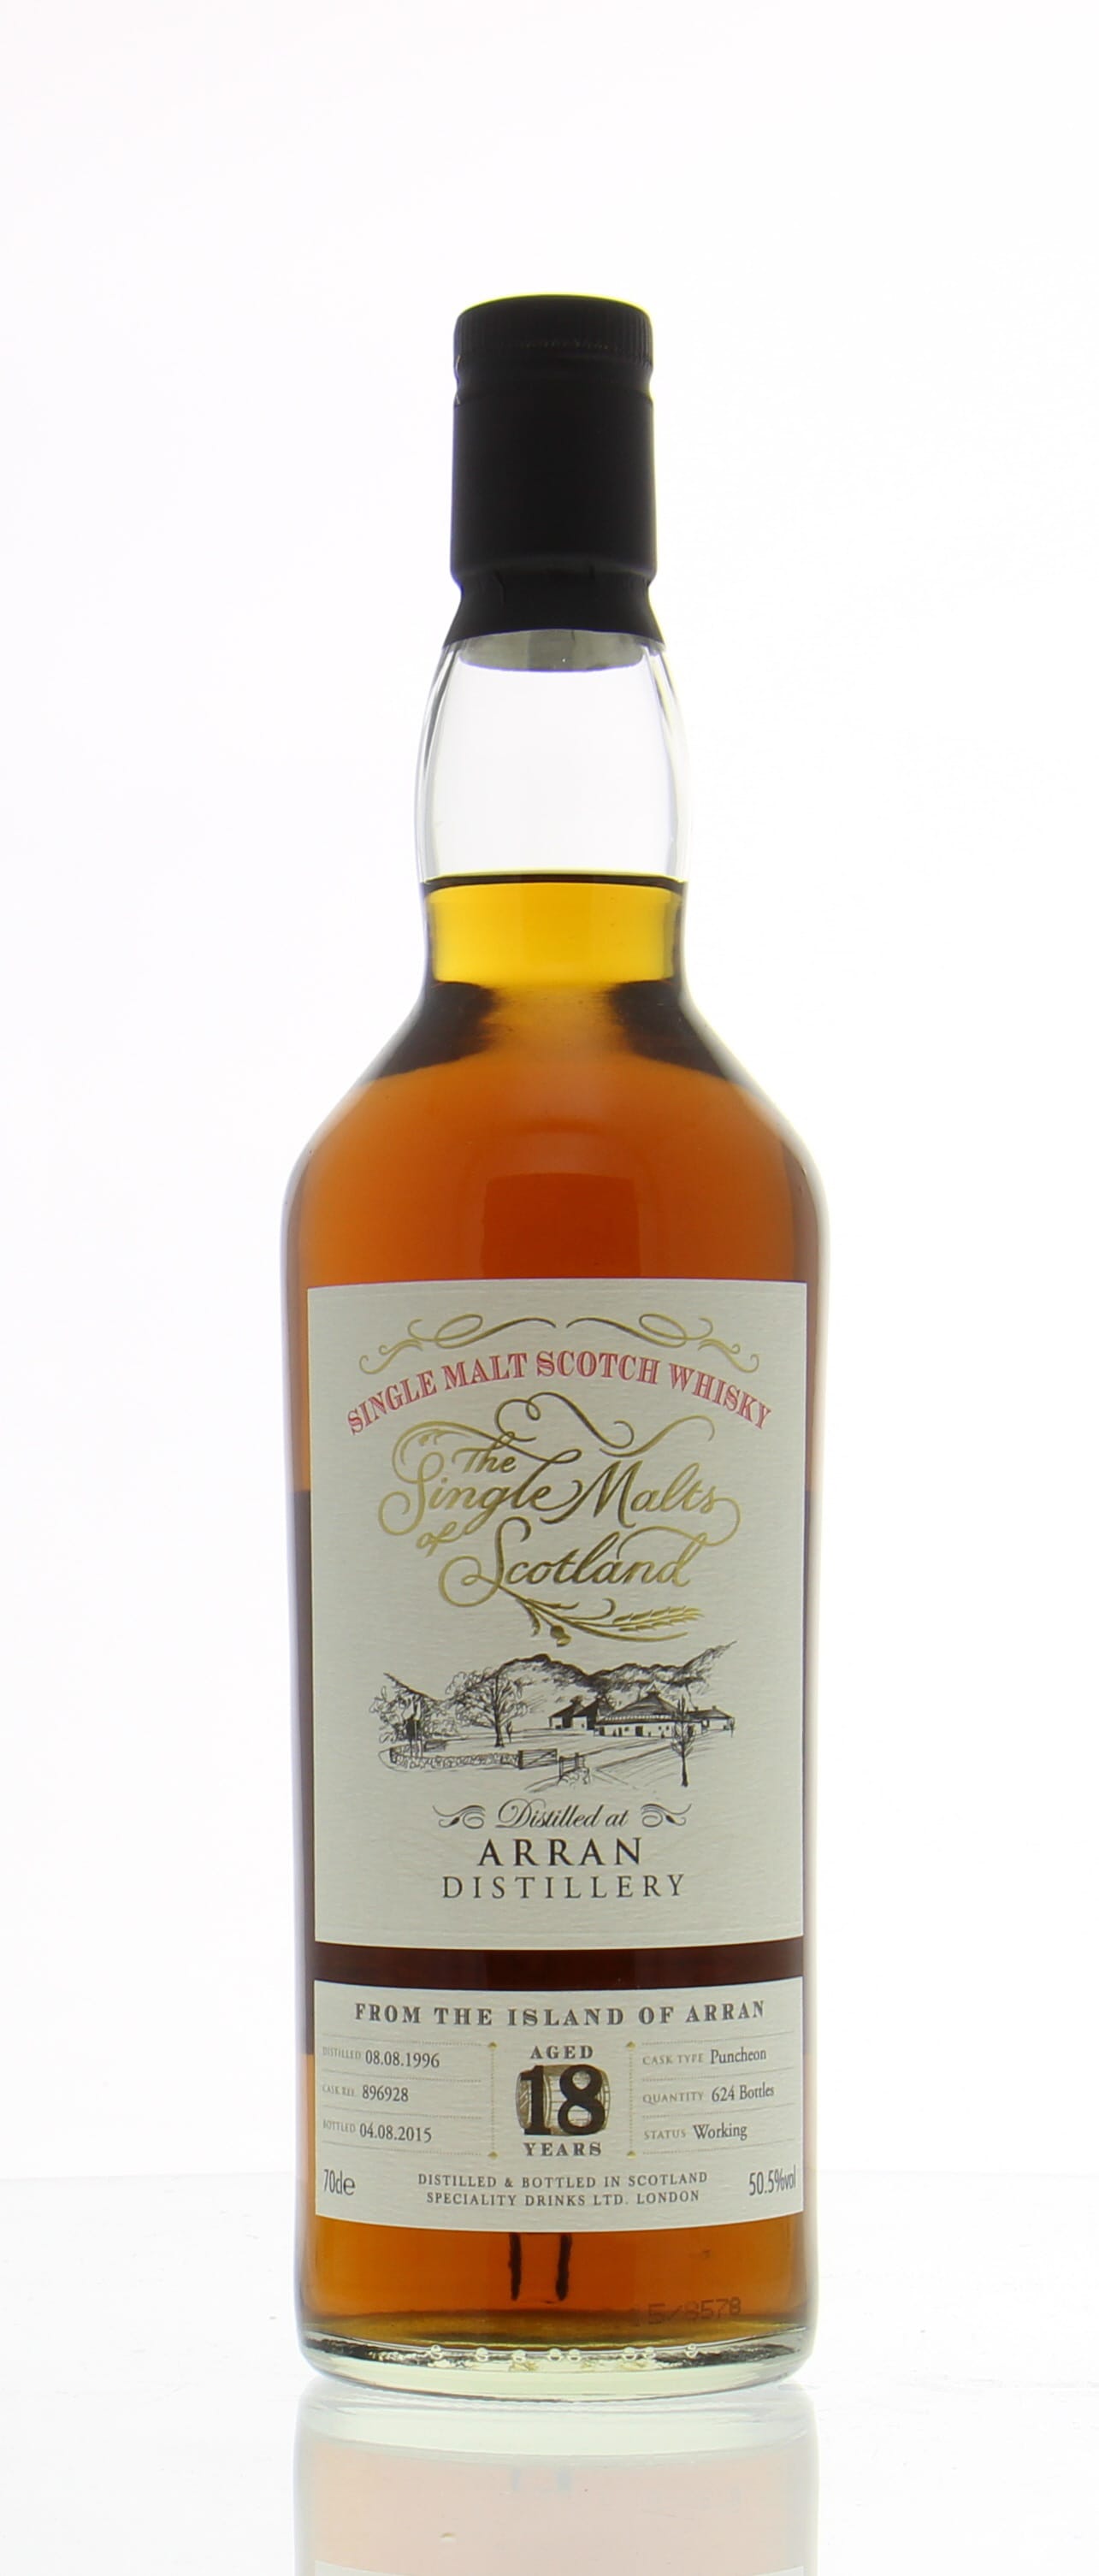 Arran - 18 Years Old The Single Malts of Scotland Cask 896928 50.5% 1996 Perfect